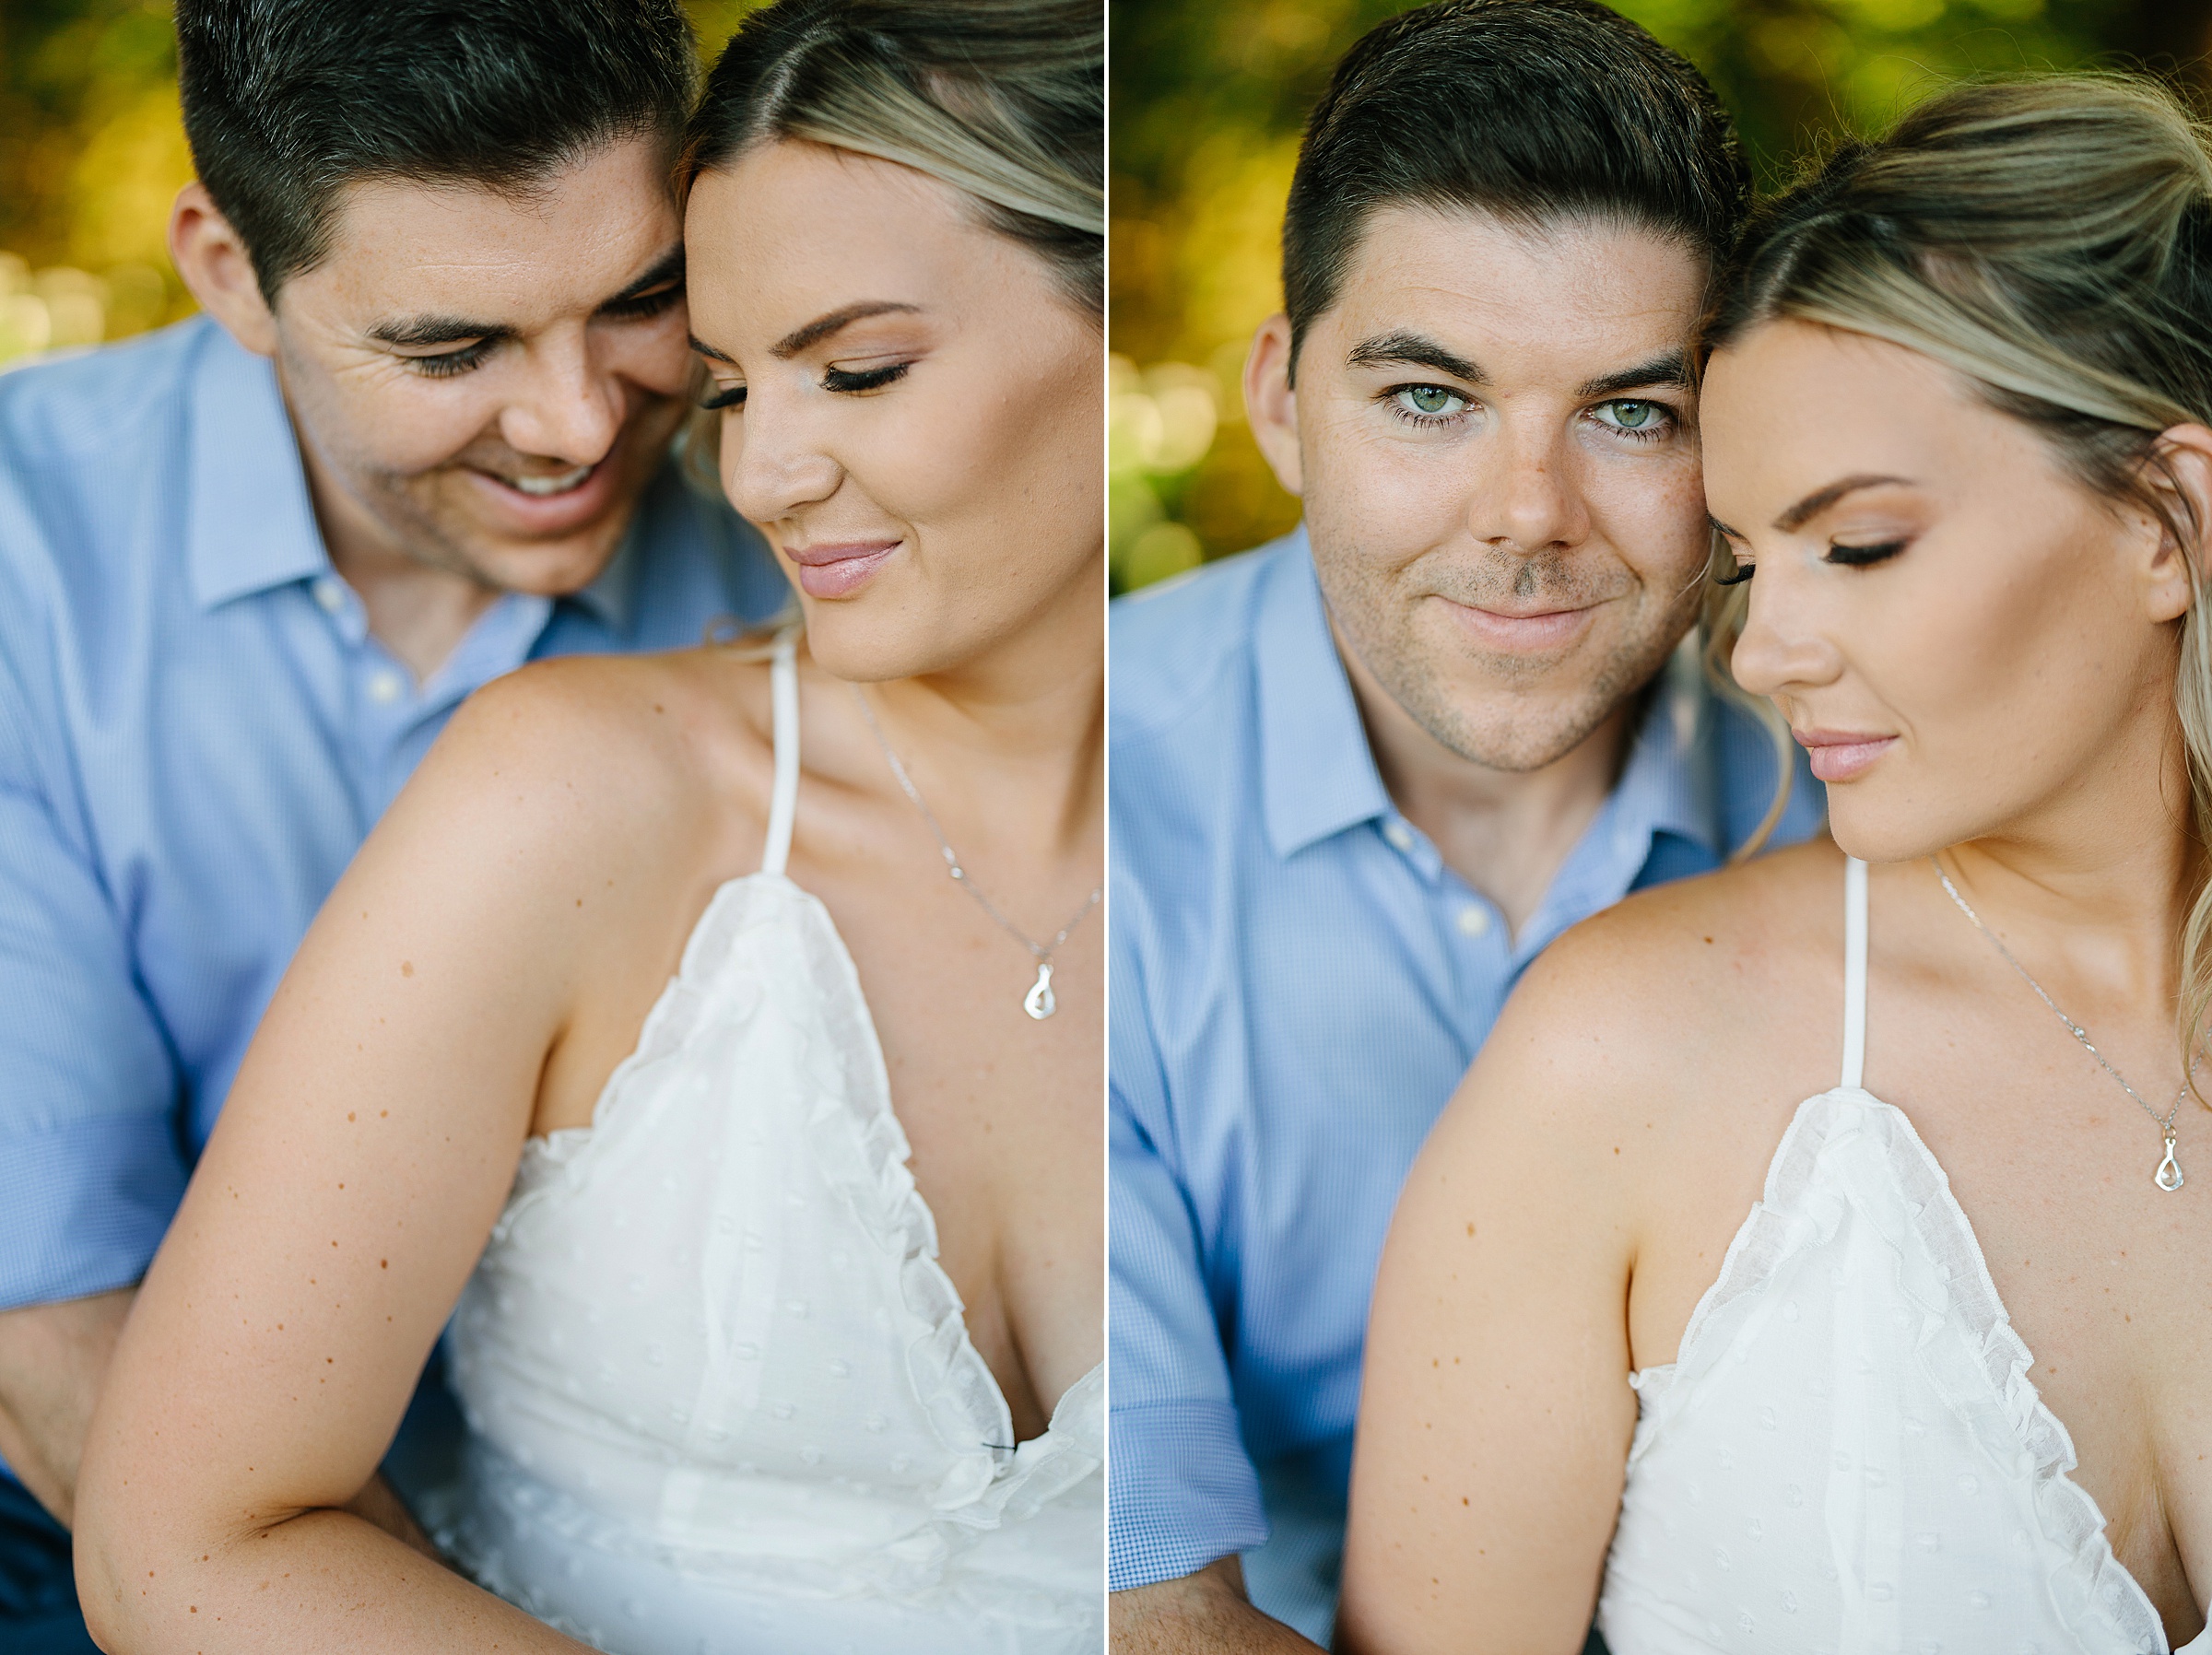 Engaged couple sits together and snuggles close, fiancé holds his future bride and looks at camera